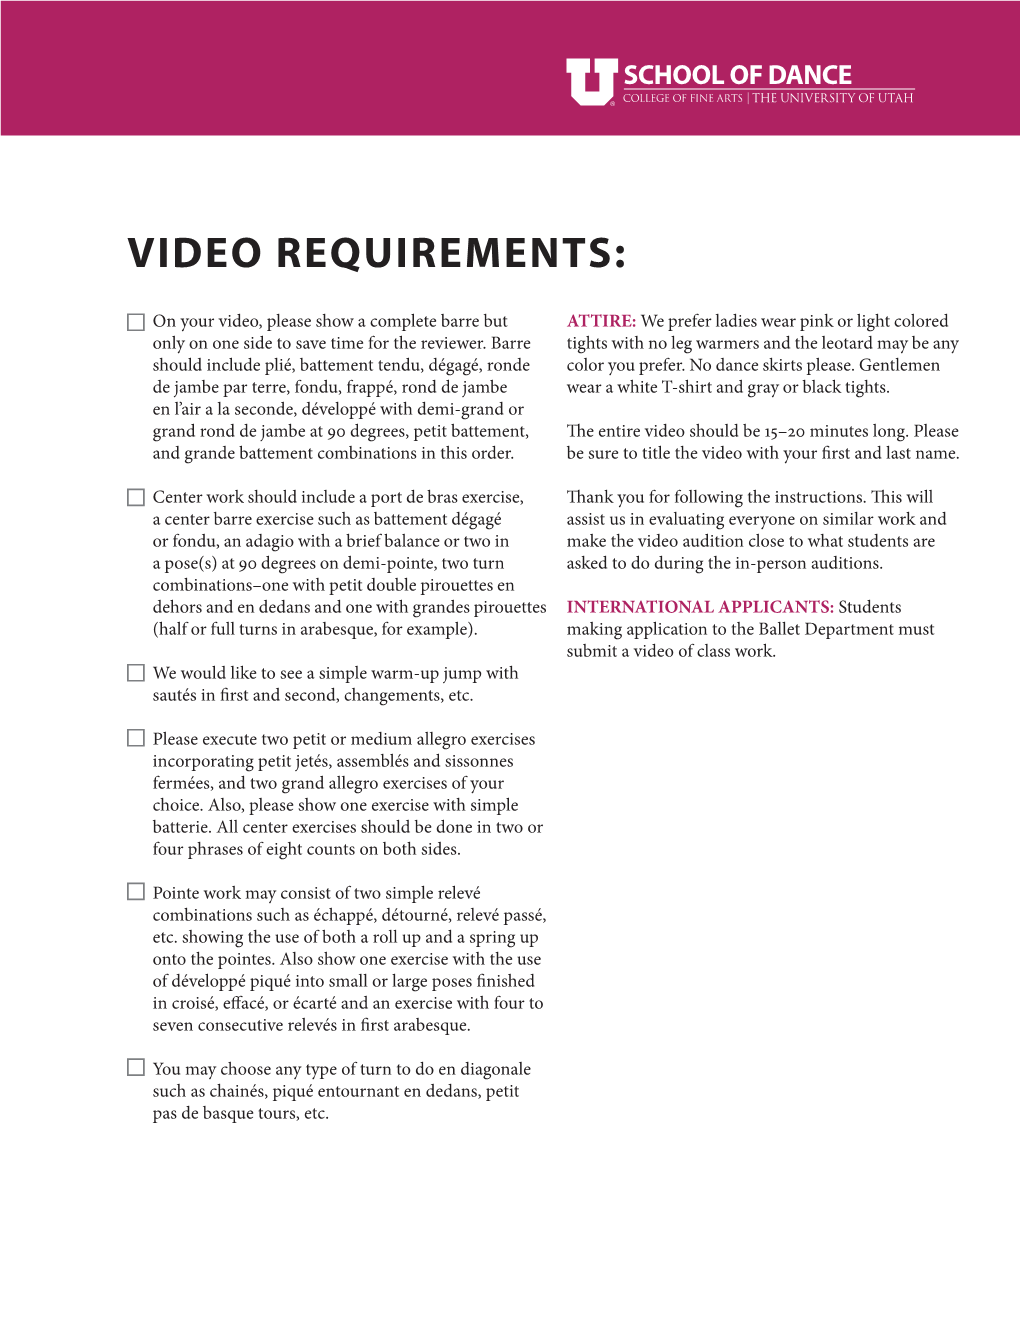 Video Requirements